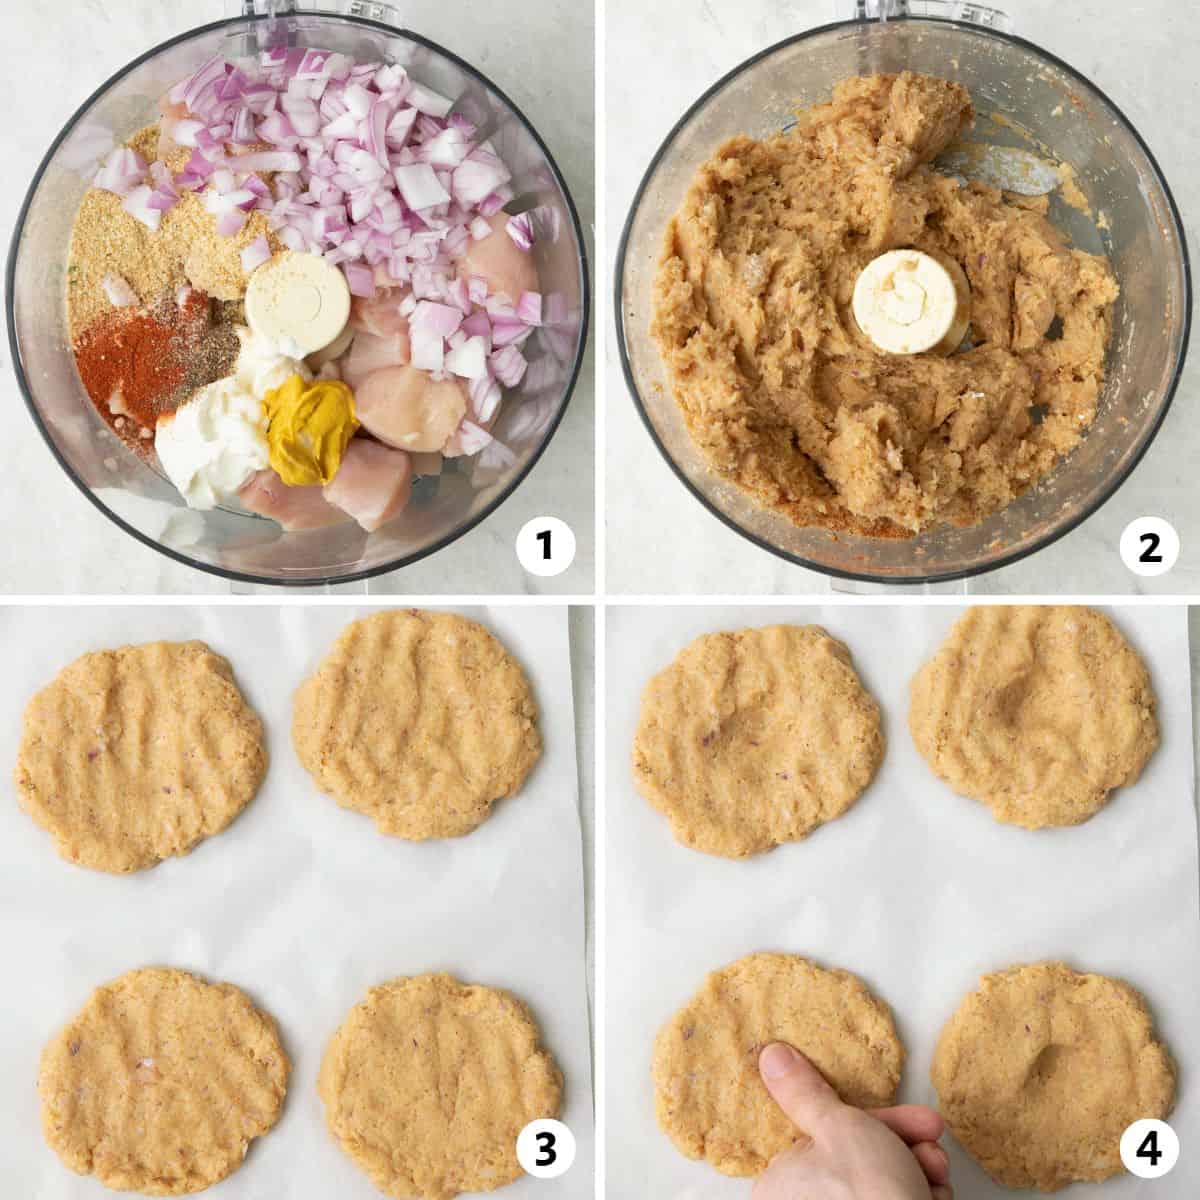 4 image collage making recipe: 1- ingredients in a food processor, 2- after processing into a paste, 3- formed patties on a piece of parchment paper, and 4- a thumb pressing an indention into the center of each patty.